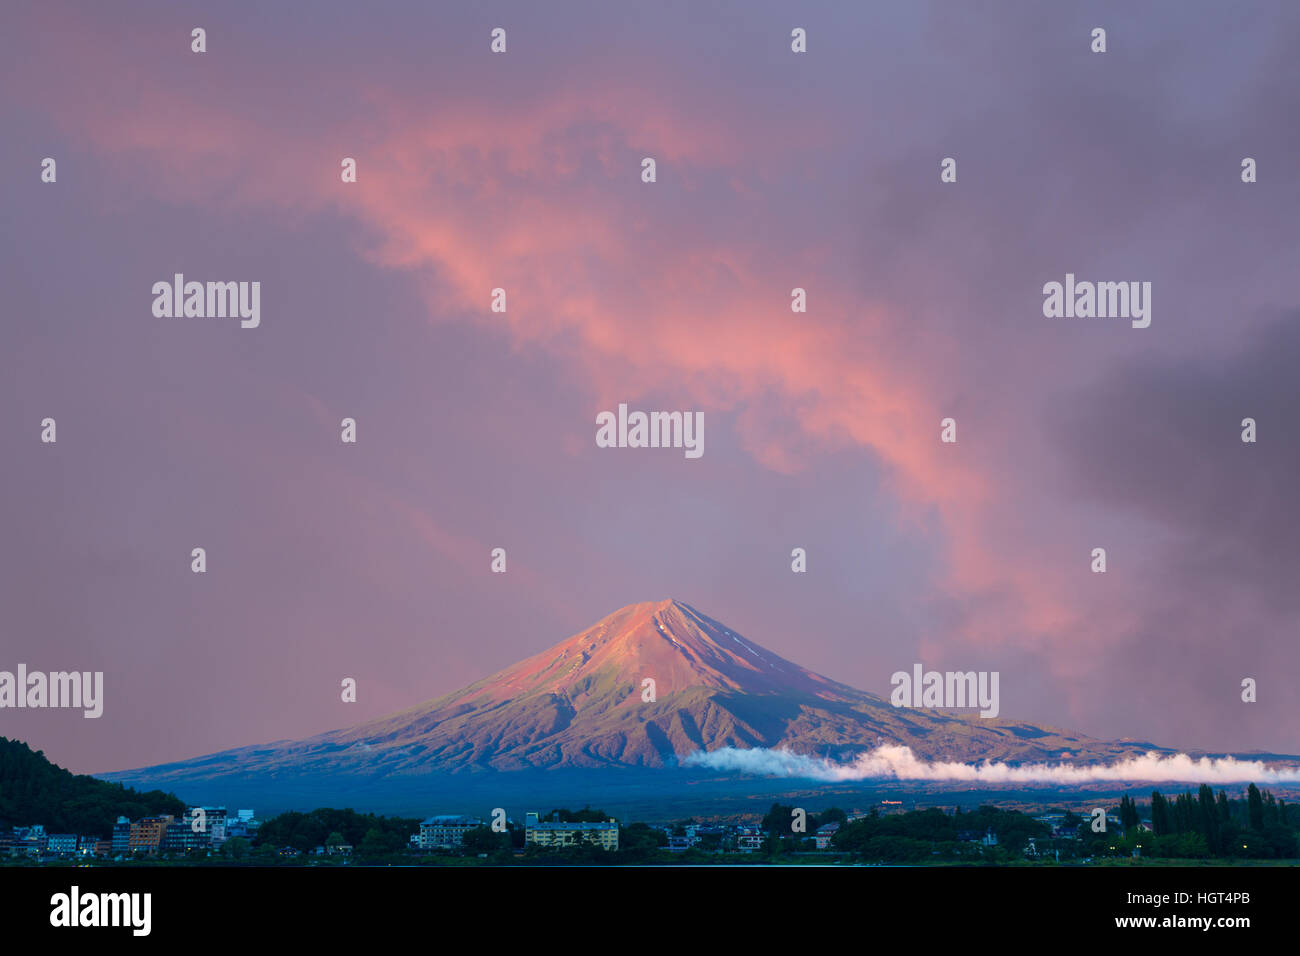 Beautiful red sunrise sky above the bright red volcanic cone of Mount Fuji with line of lake shore hotels in Kawaguchiko Stock Photo